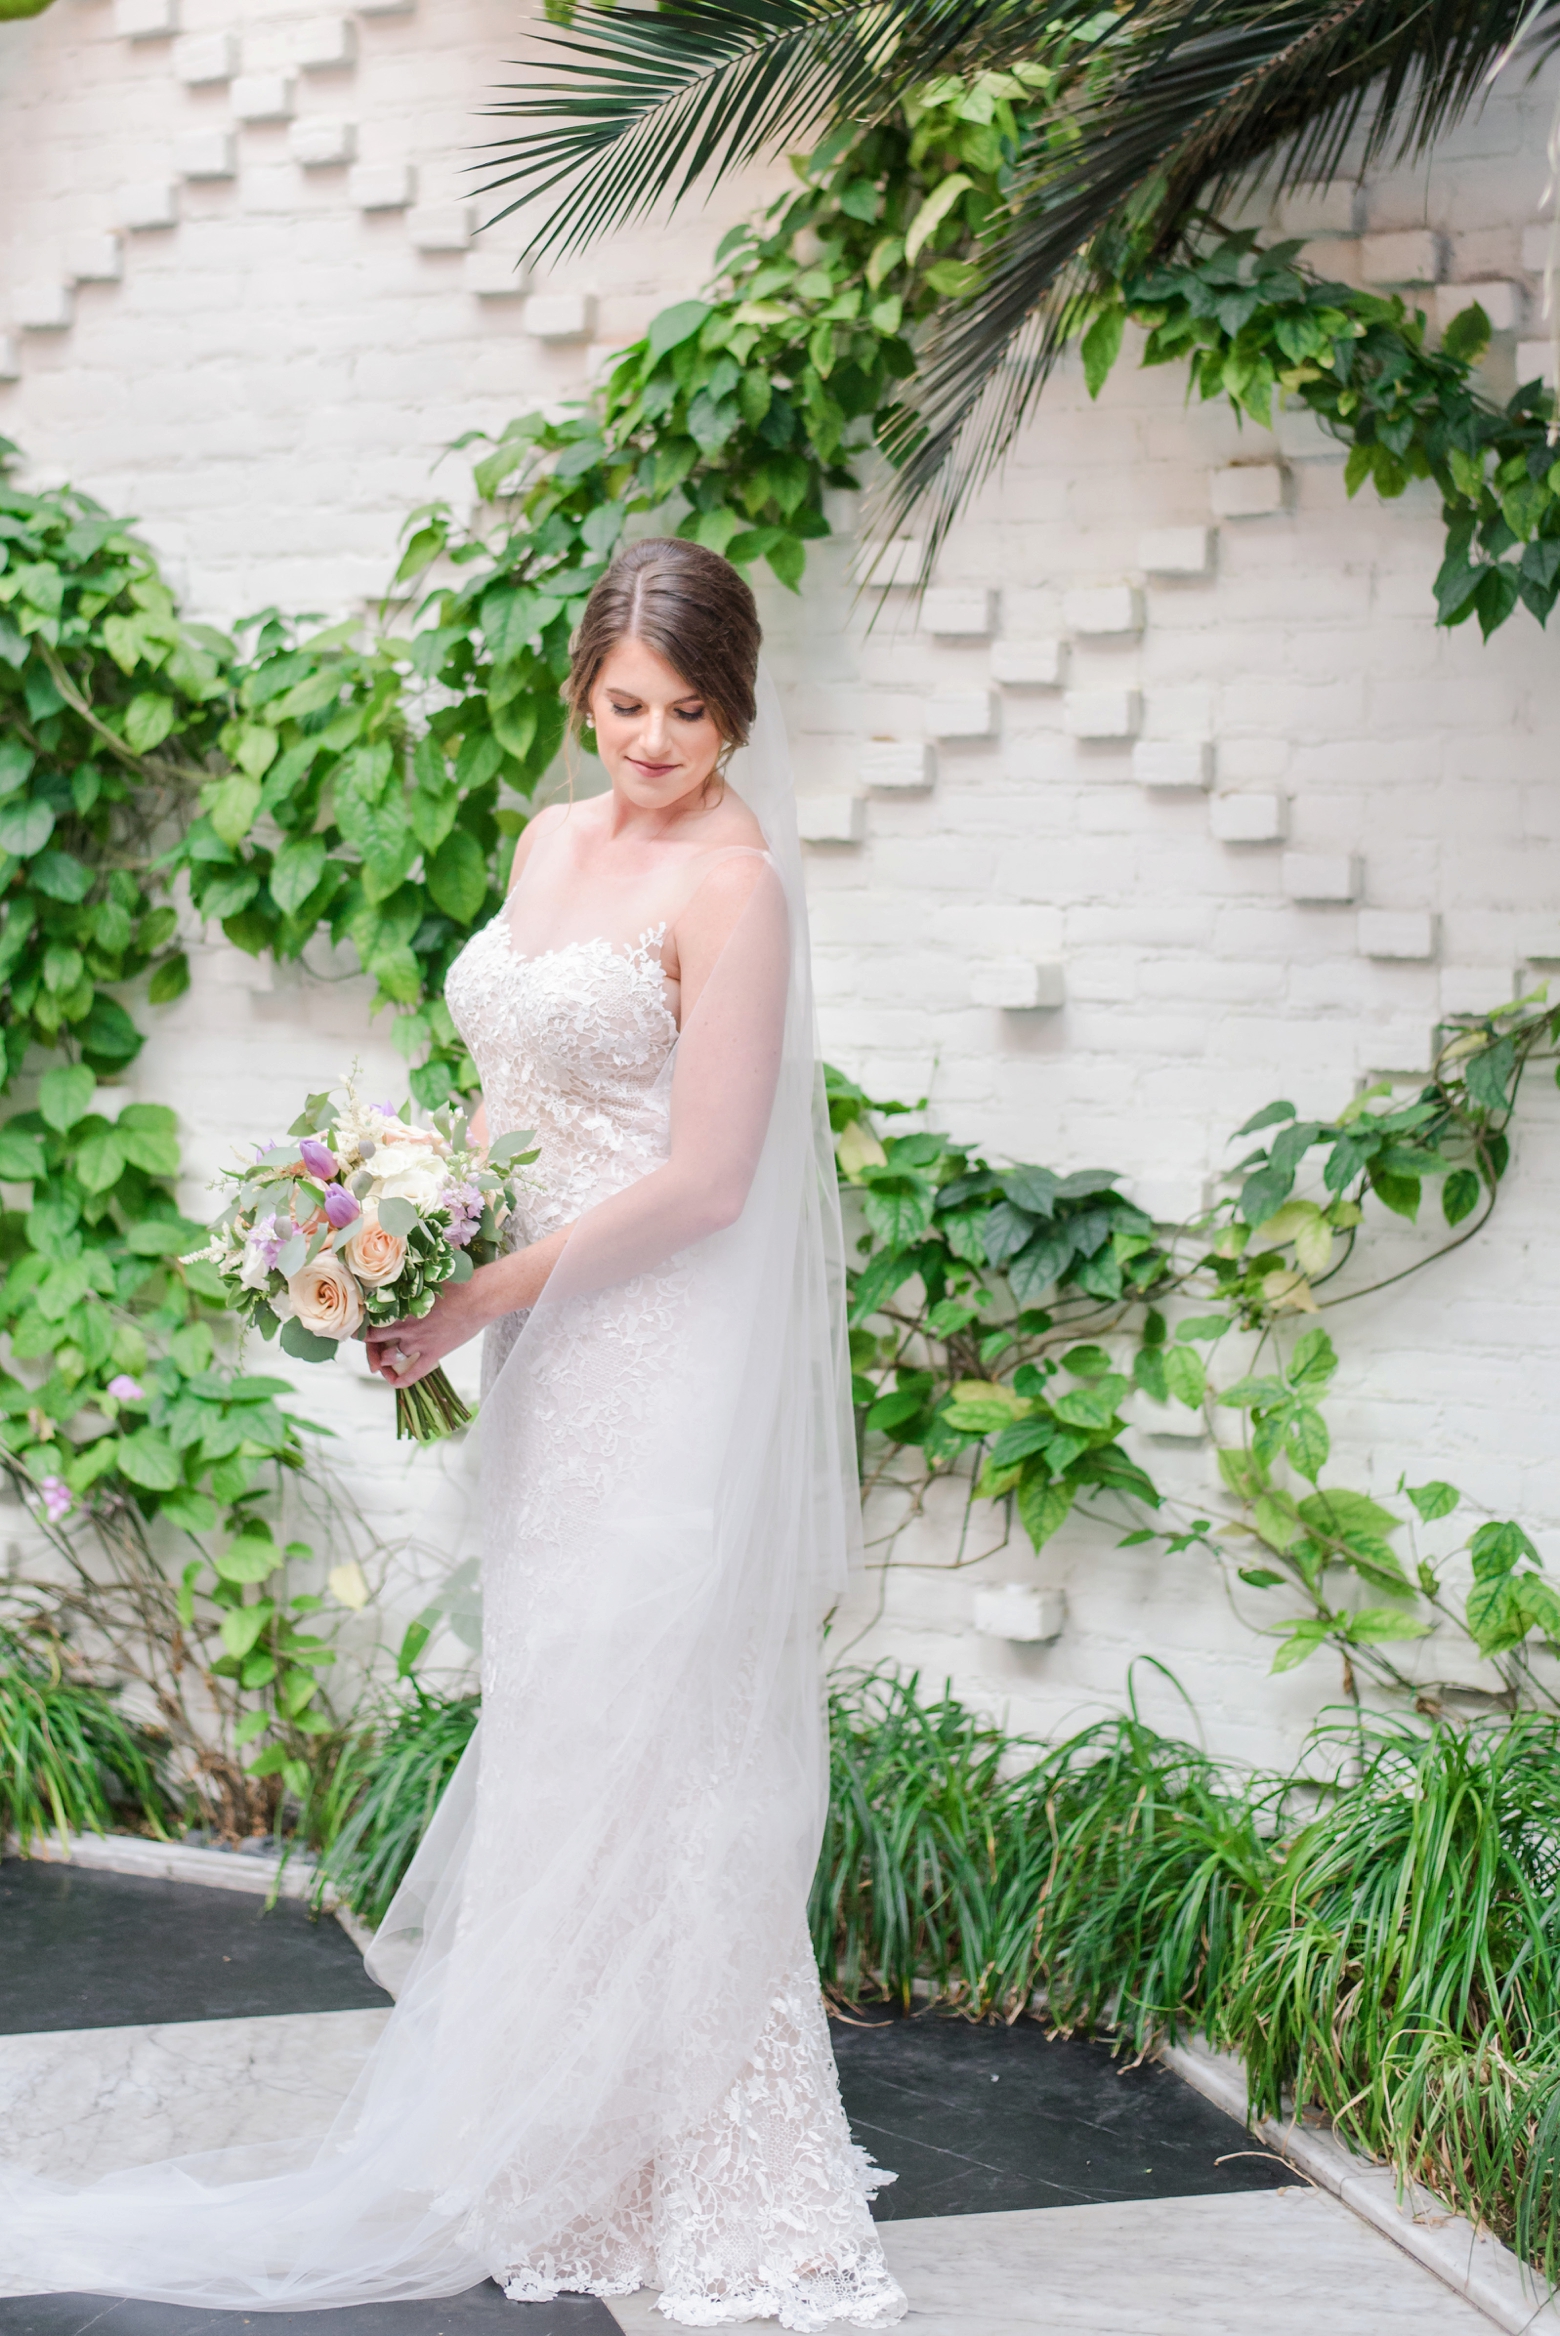 Bride standing in front of a white brick wall and greenery during her bridal session